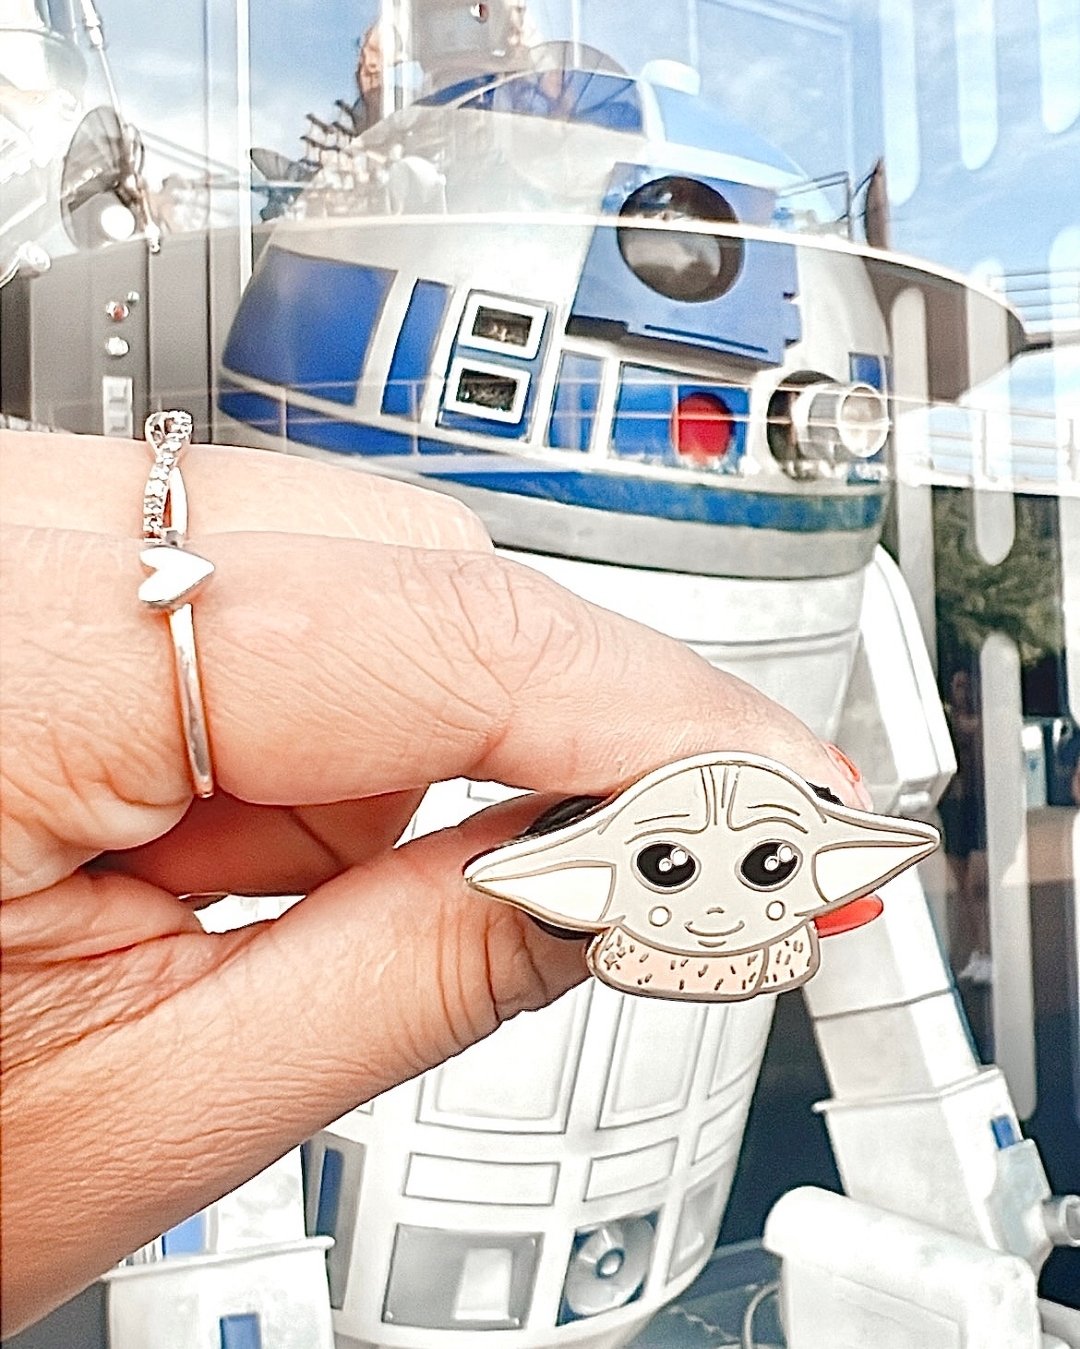 ✨The cutest baby in the galaxy ✨

For all my star wars lovers, this isn&rsquo;t the only pin from a galaxy far, far away available now!